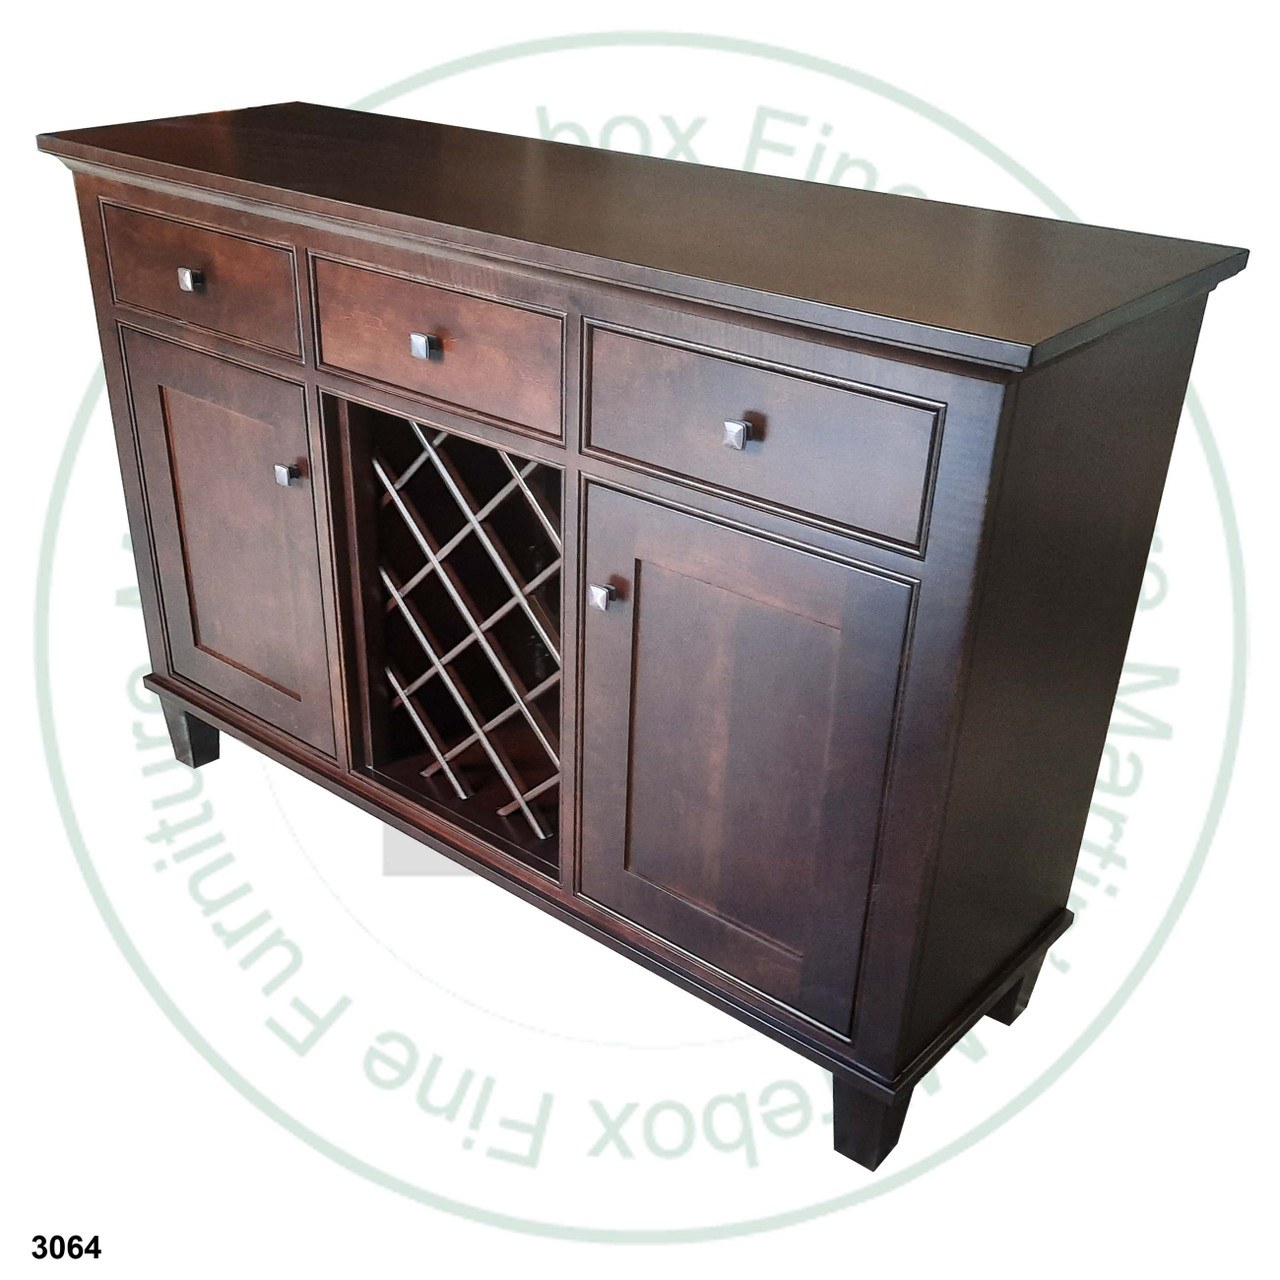 Pine Georgetown Sideboard 19.5'' Deep x 61.5'' Wide x 42'' High With 2 Wood Doors And 3 Drawers